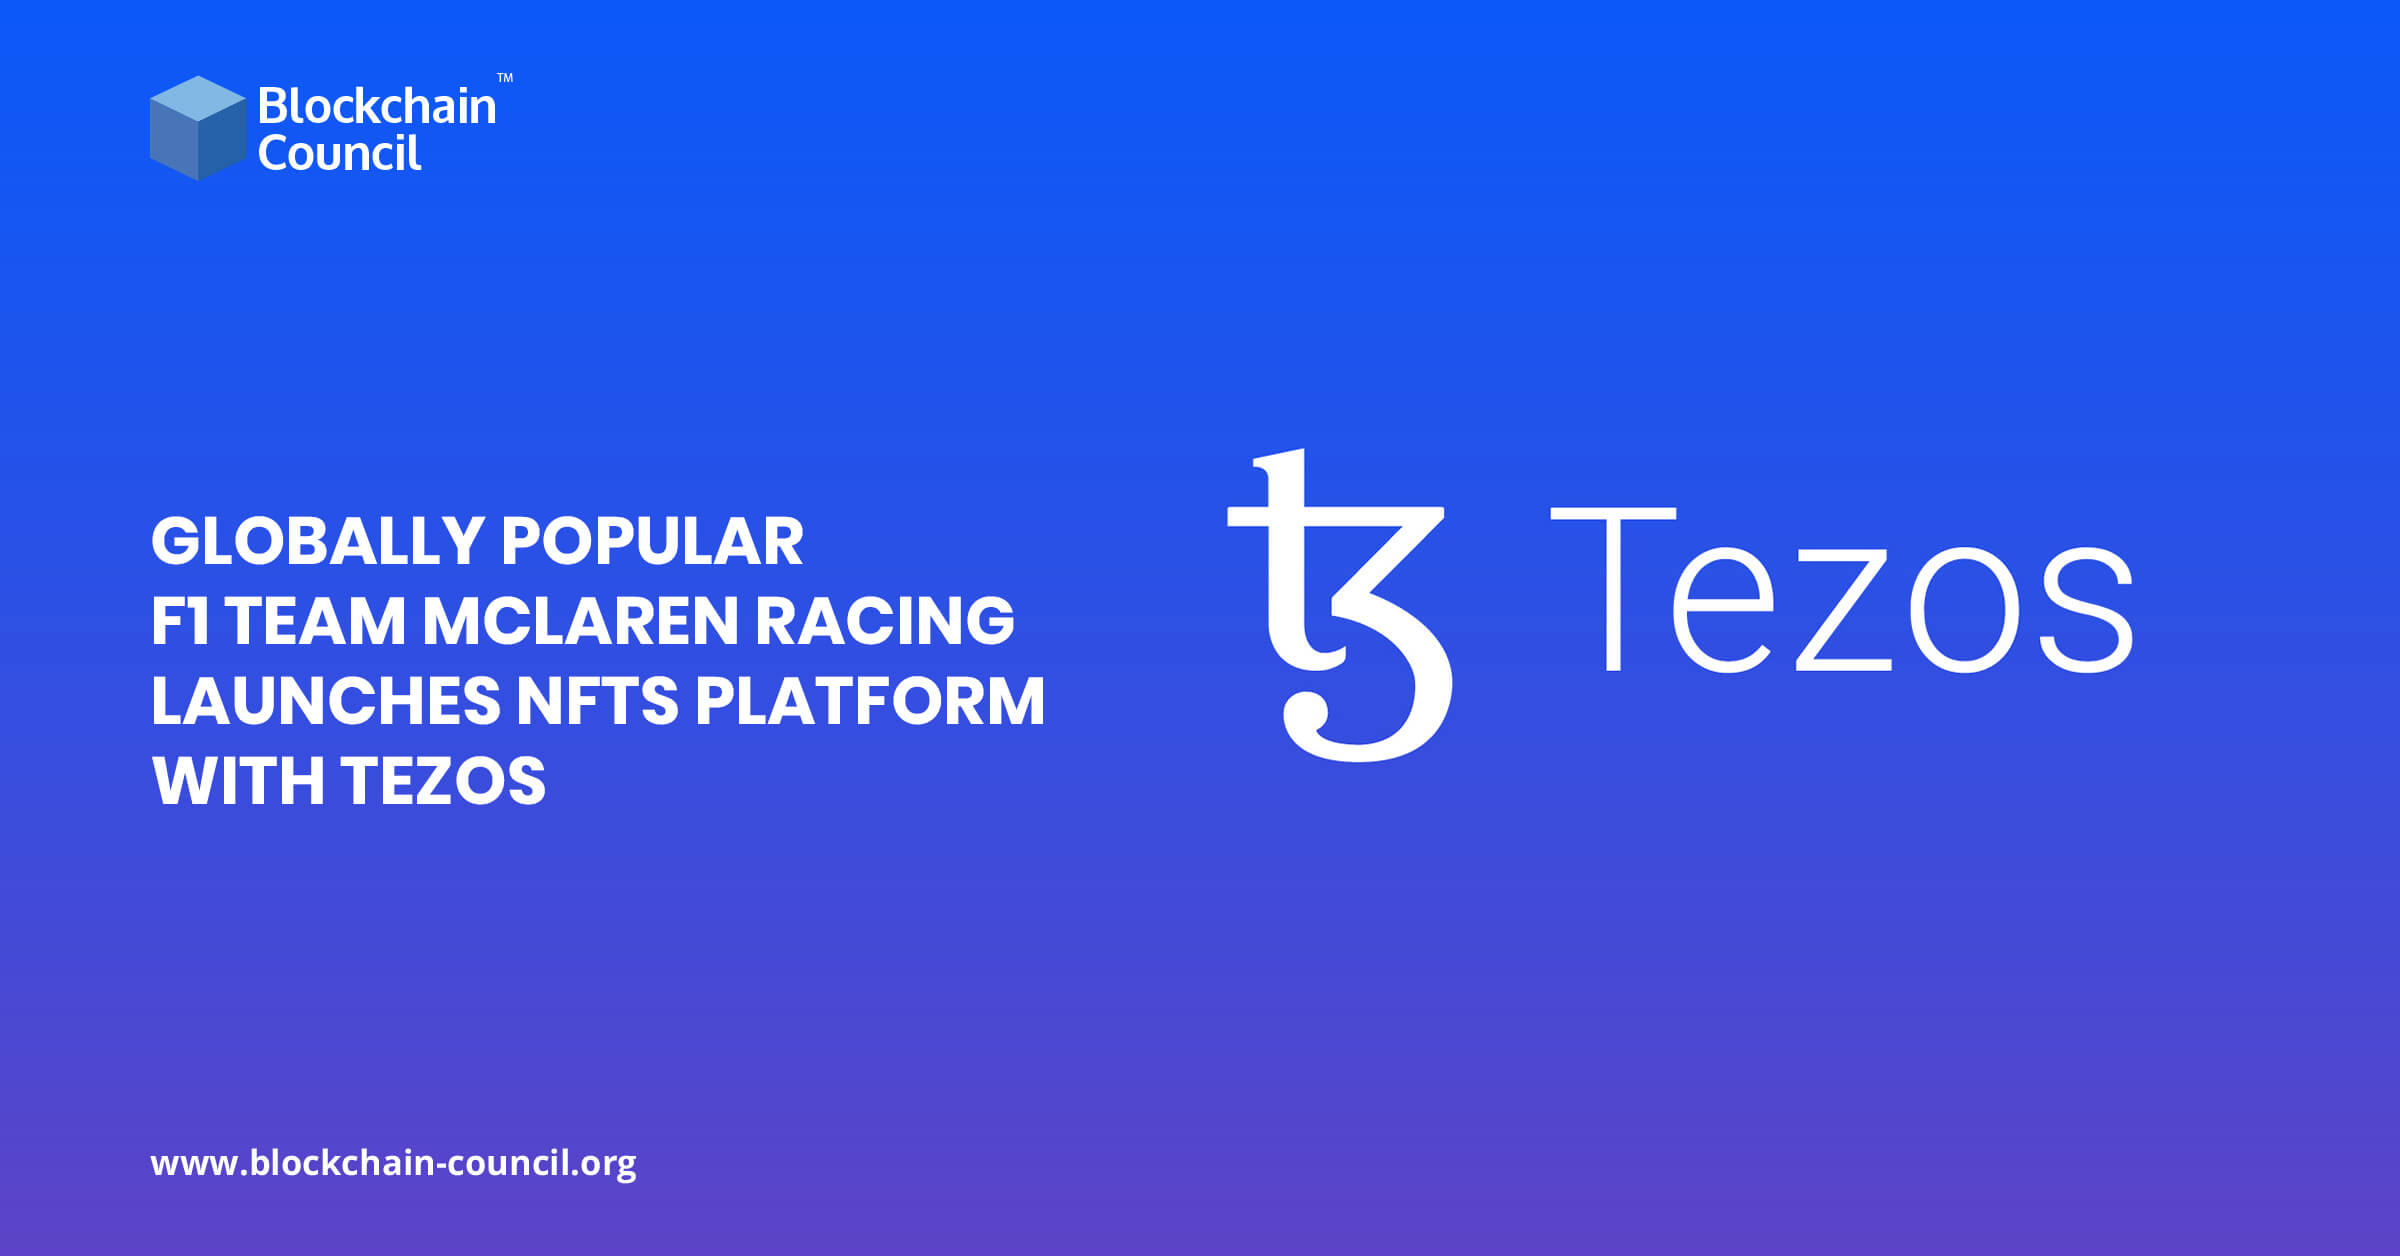 Globally Popular F1 Team McLaren Racing Launches NFTs Platform With Tezos new (1)